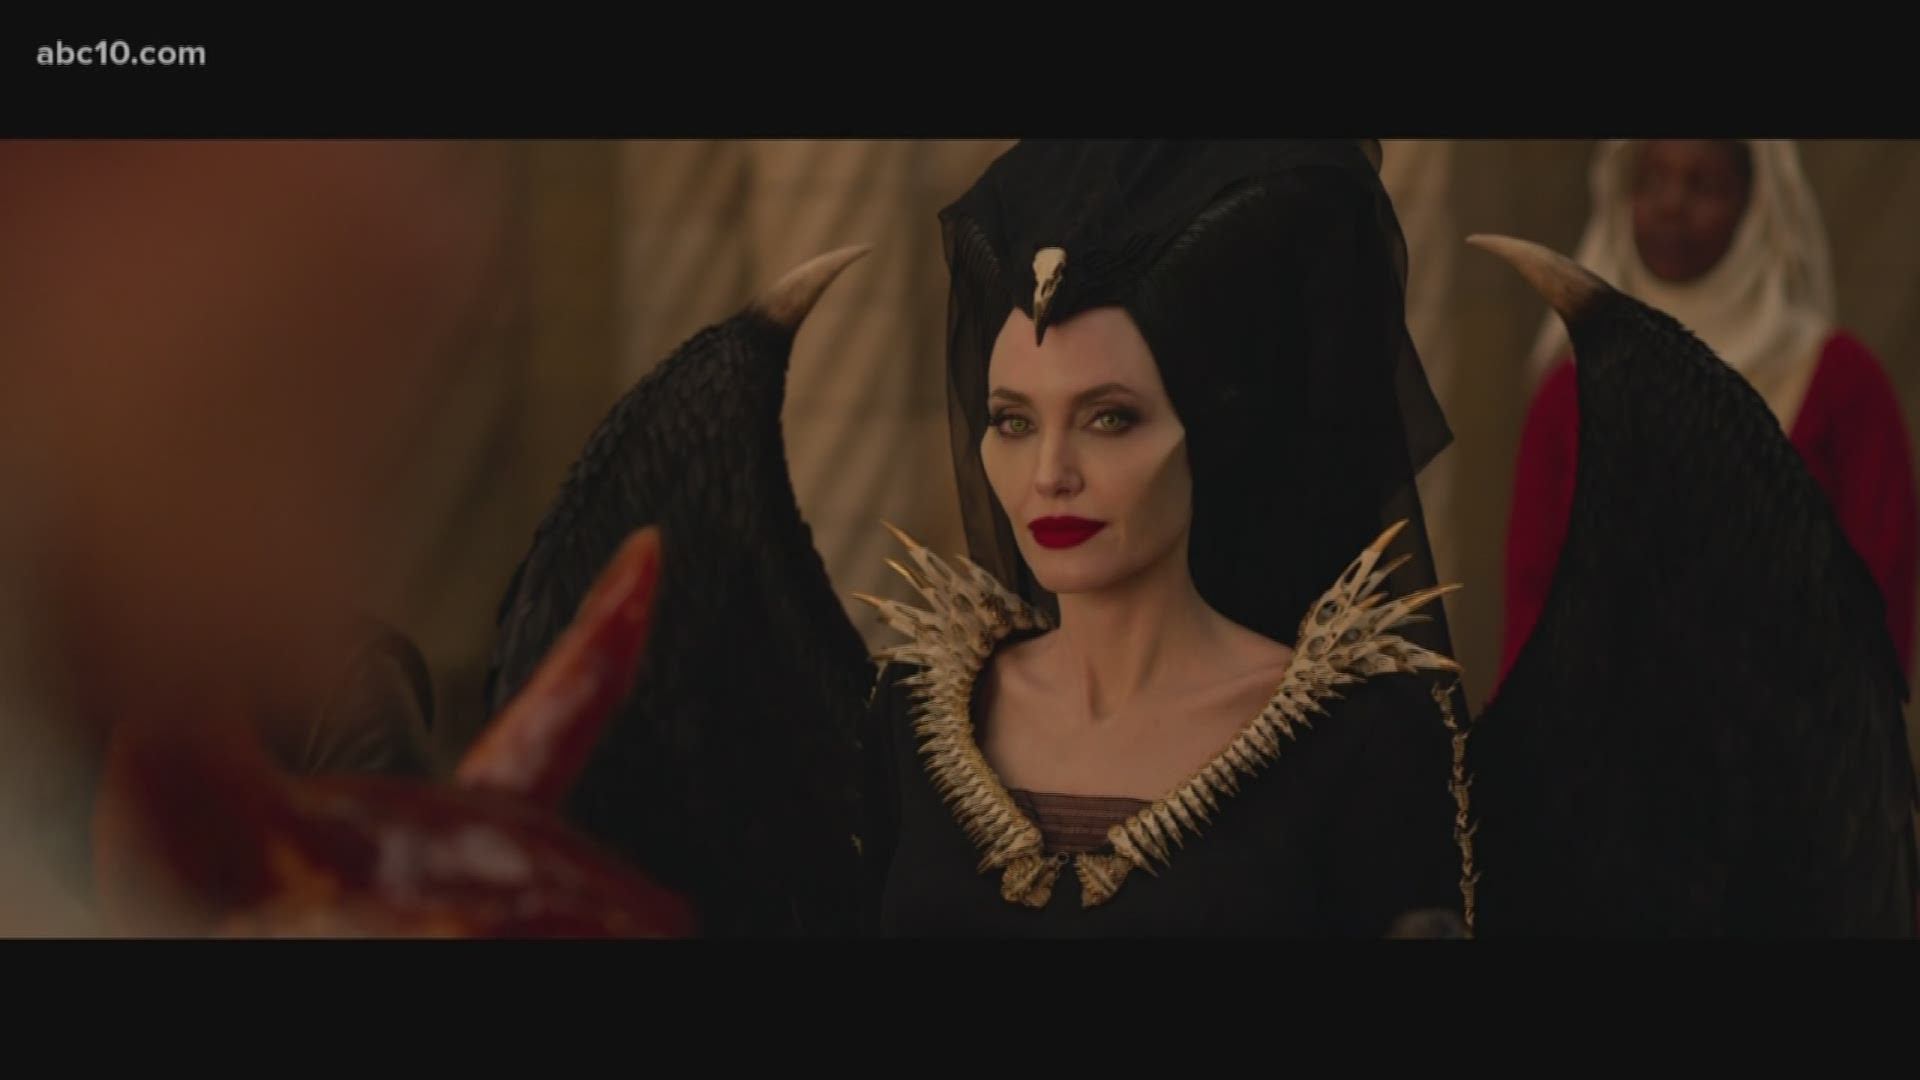 Mark S. Allen reviews the new movie 'Maleficent: Mistress of Evil' and talks with Angelina Jolie about embarrassing her kids.